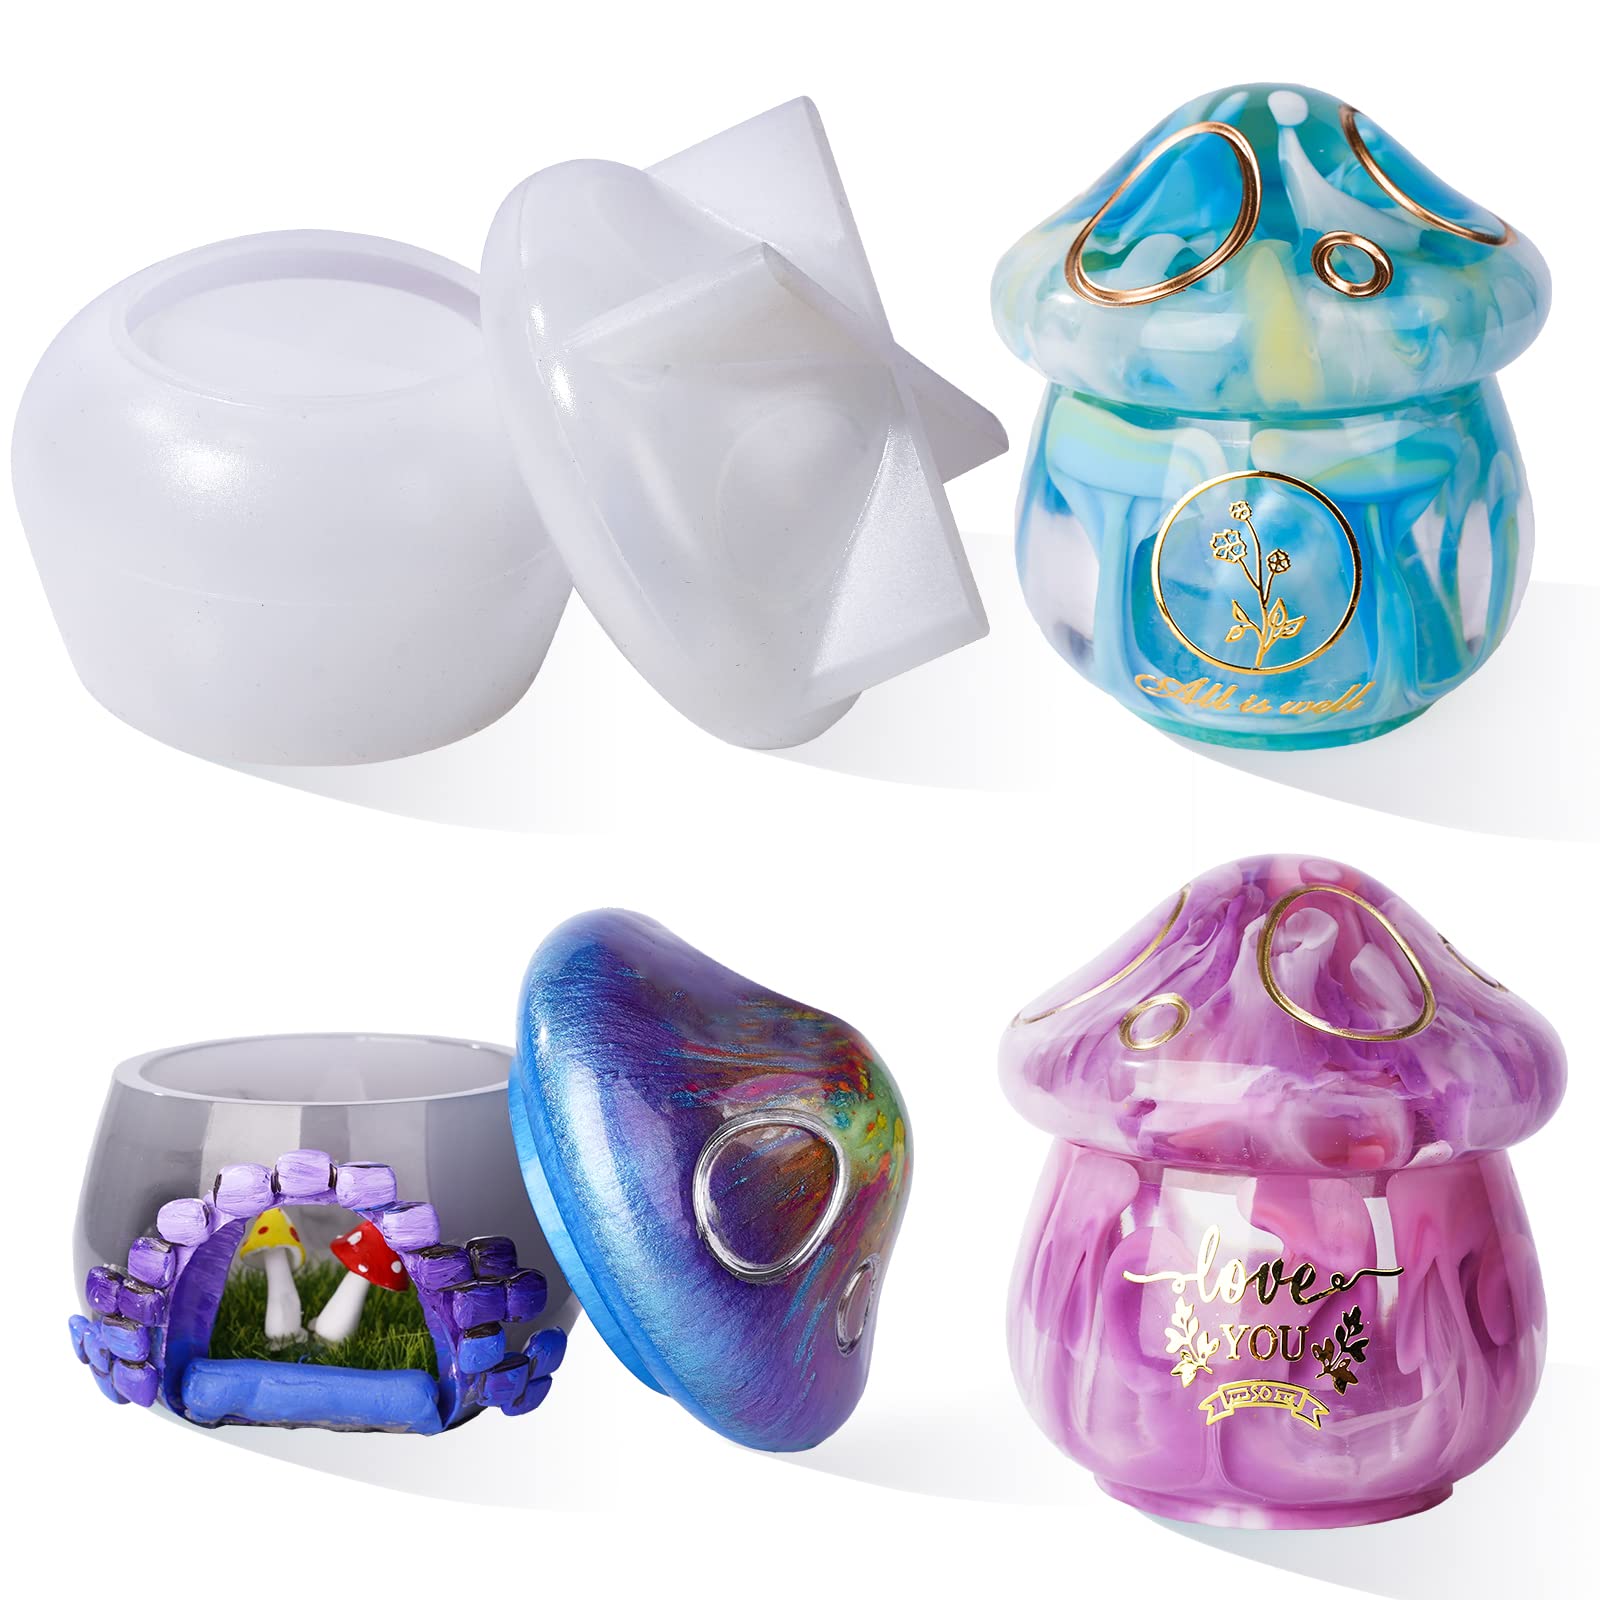 LET'S RESIN Jar Resin Molds Silicone, Mushroom Resin Jar Mold with